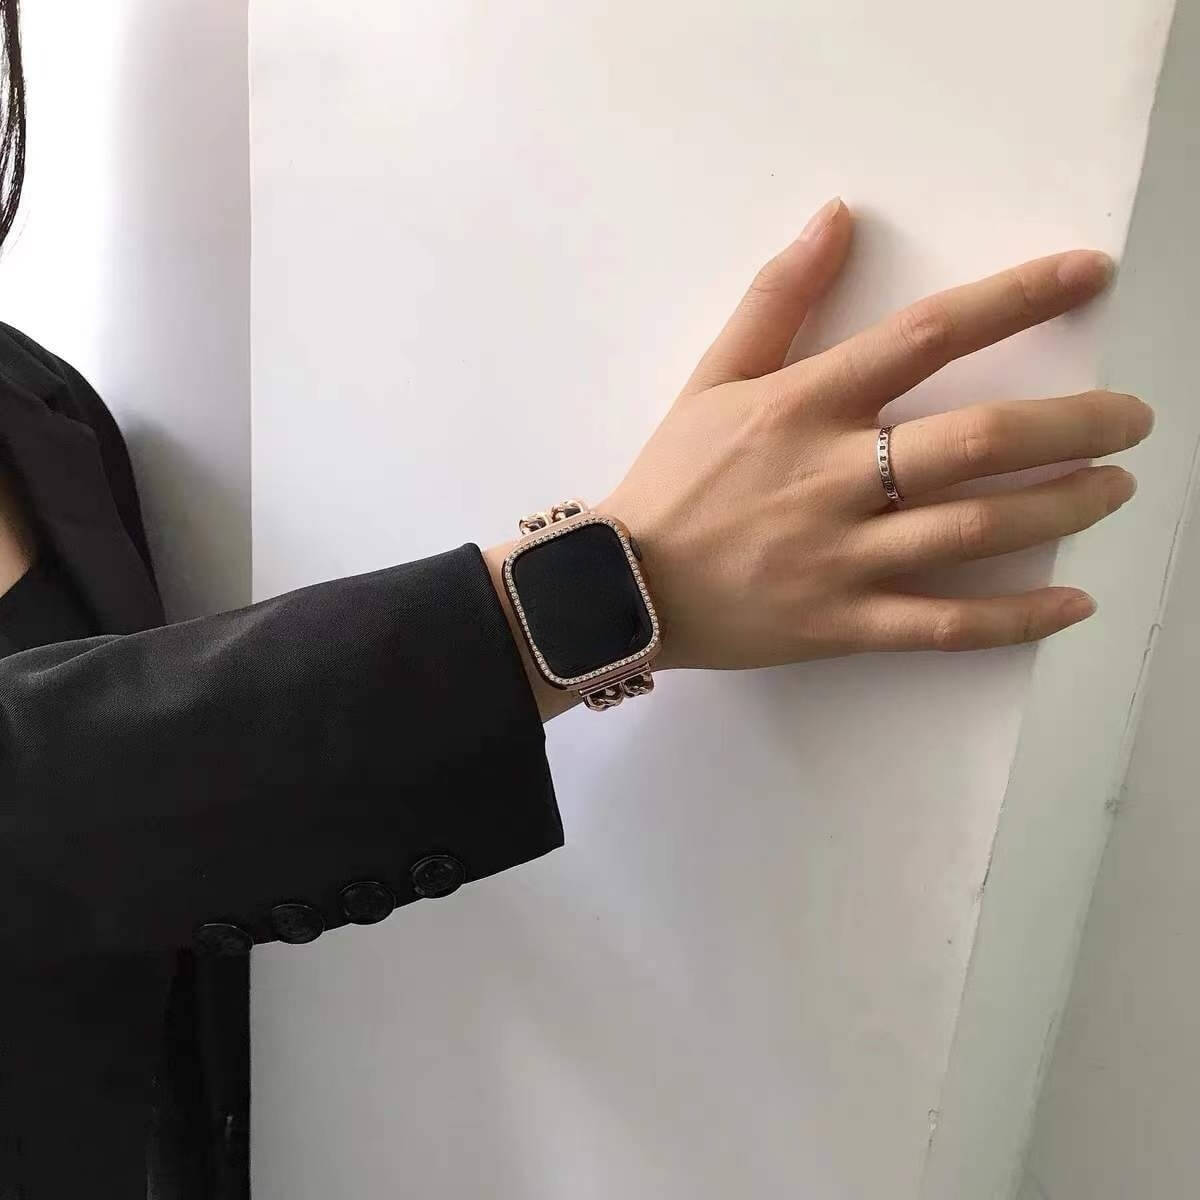 Golden Leather Apple Watch Strap